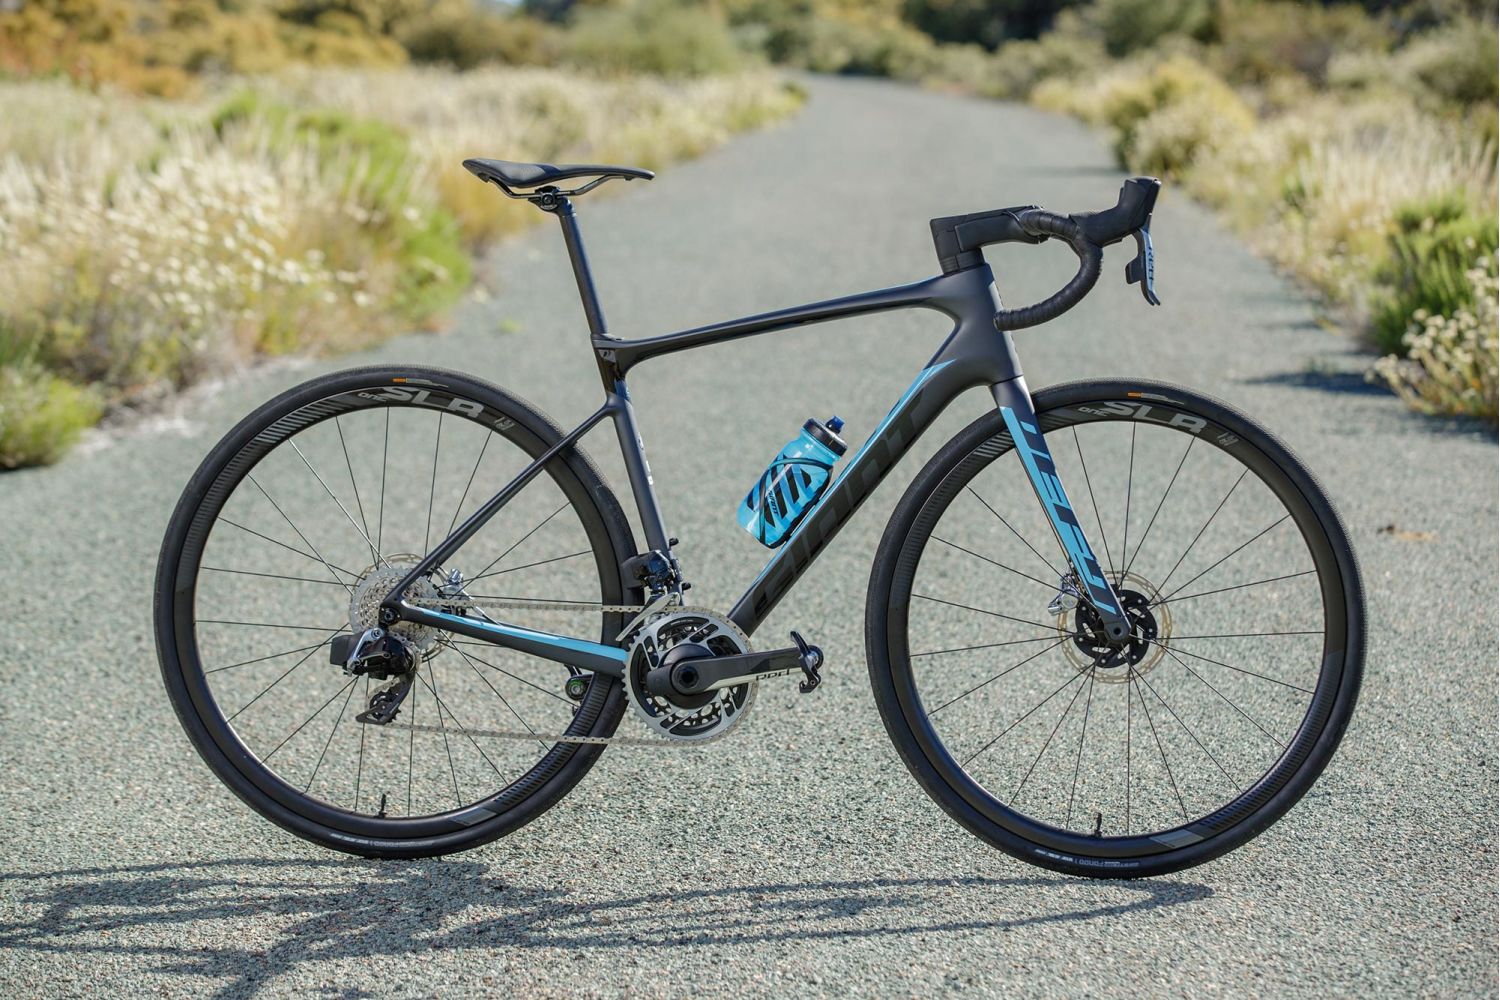 2020 giant defy advanced pro 2 review